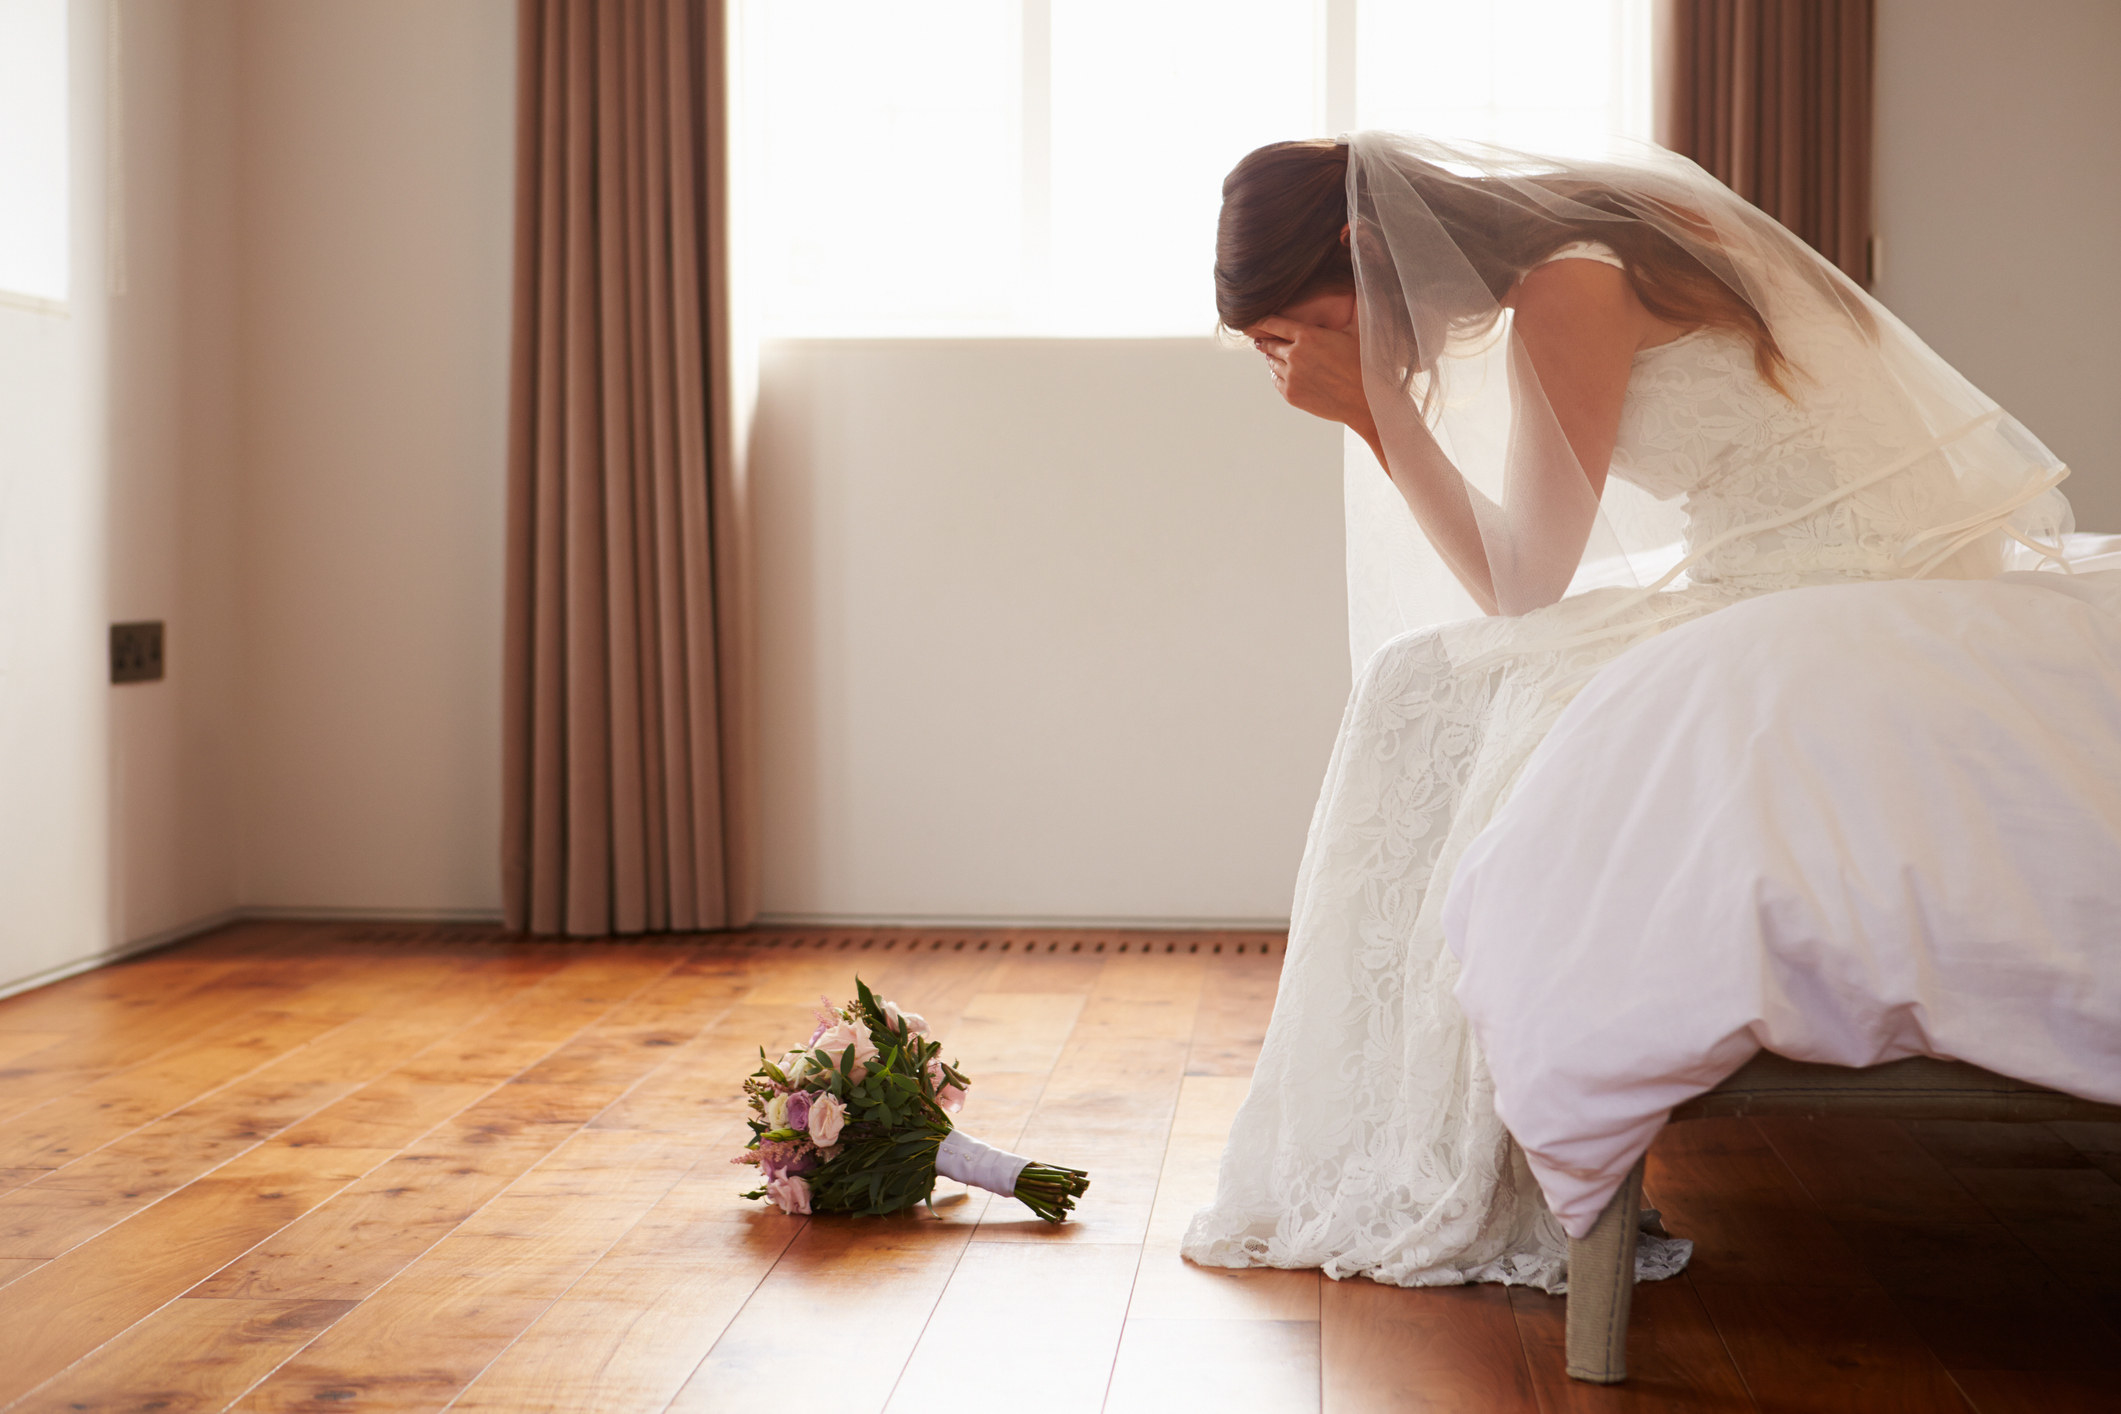 A bride crying with her bouquet on the floor